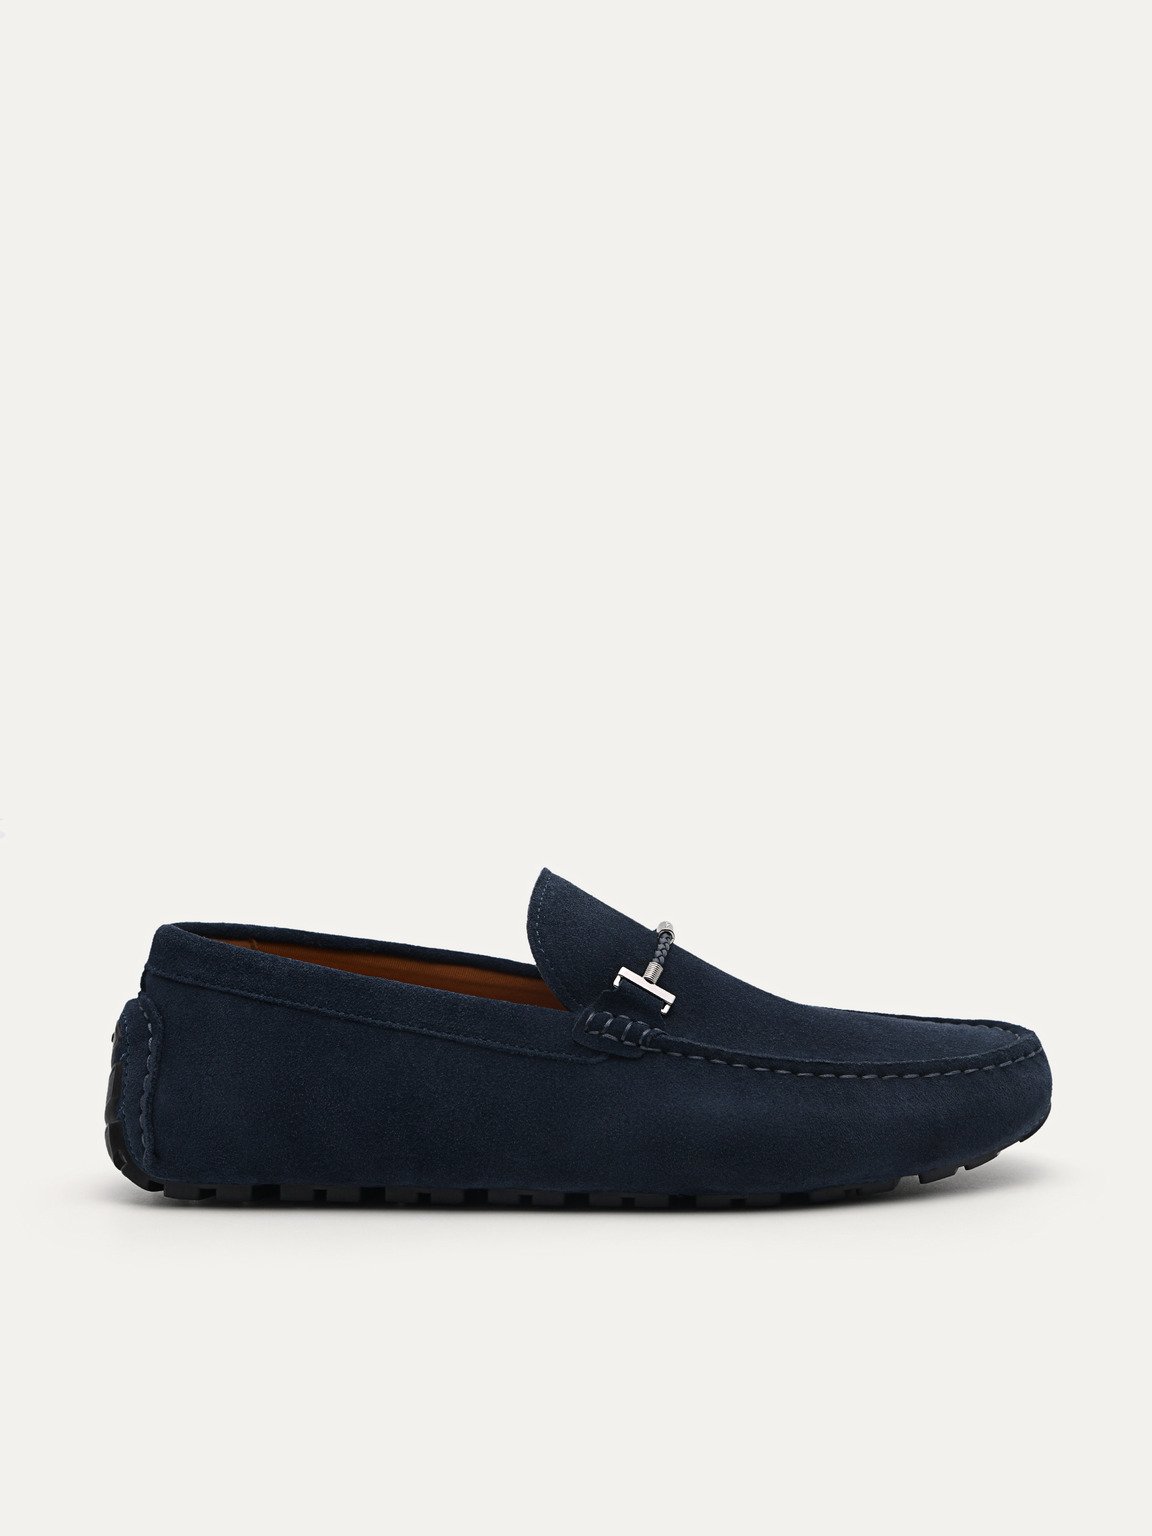 Robert Leather Driving Shoes, Navy